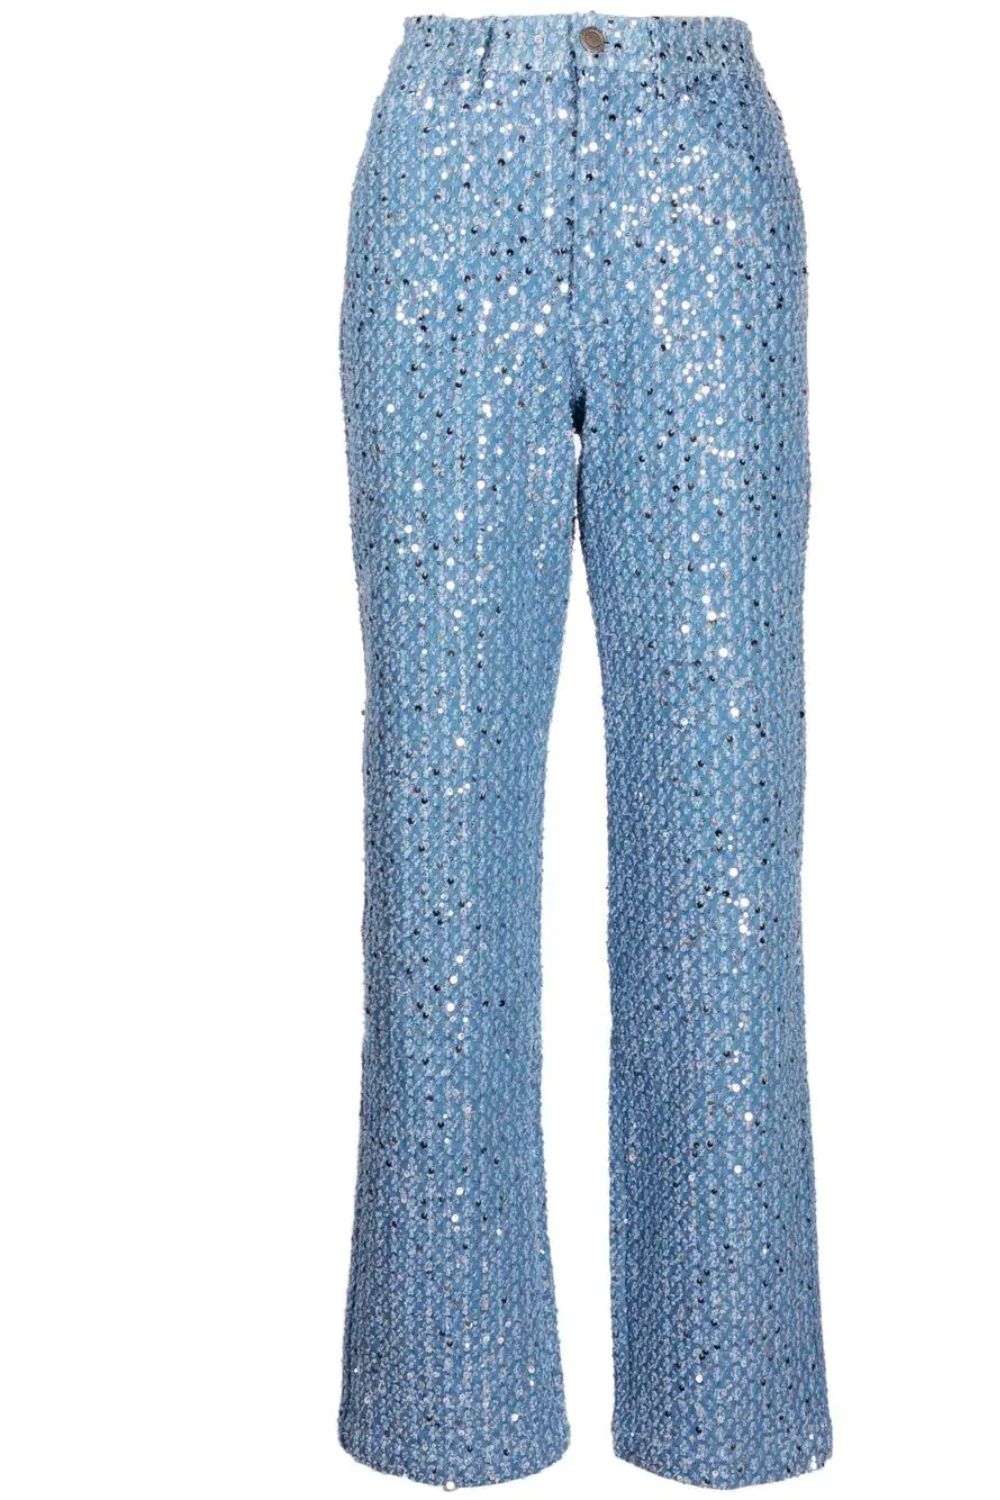 Rotate-Embellished-Jeans